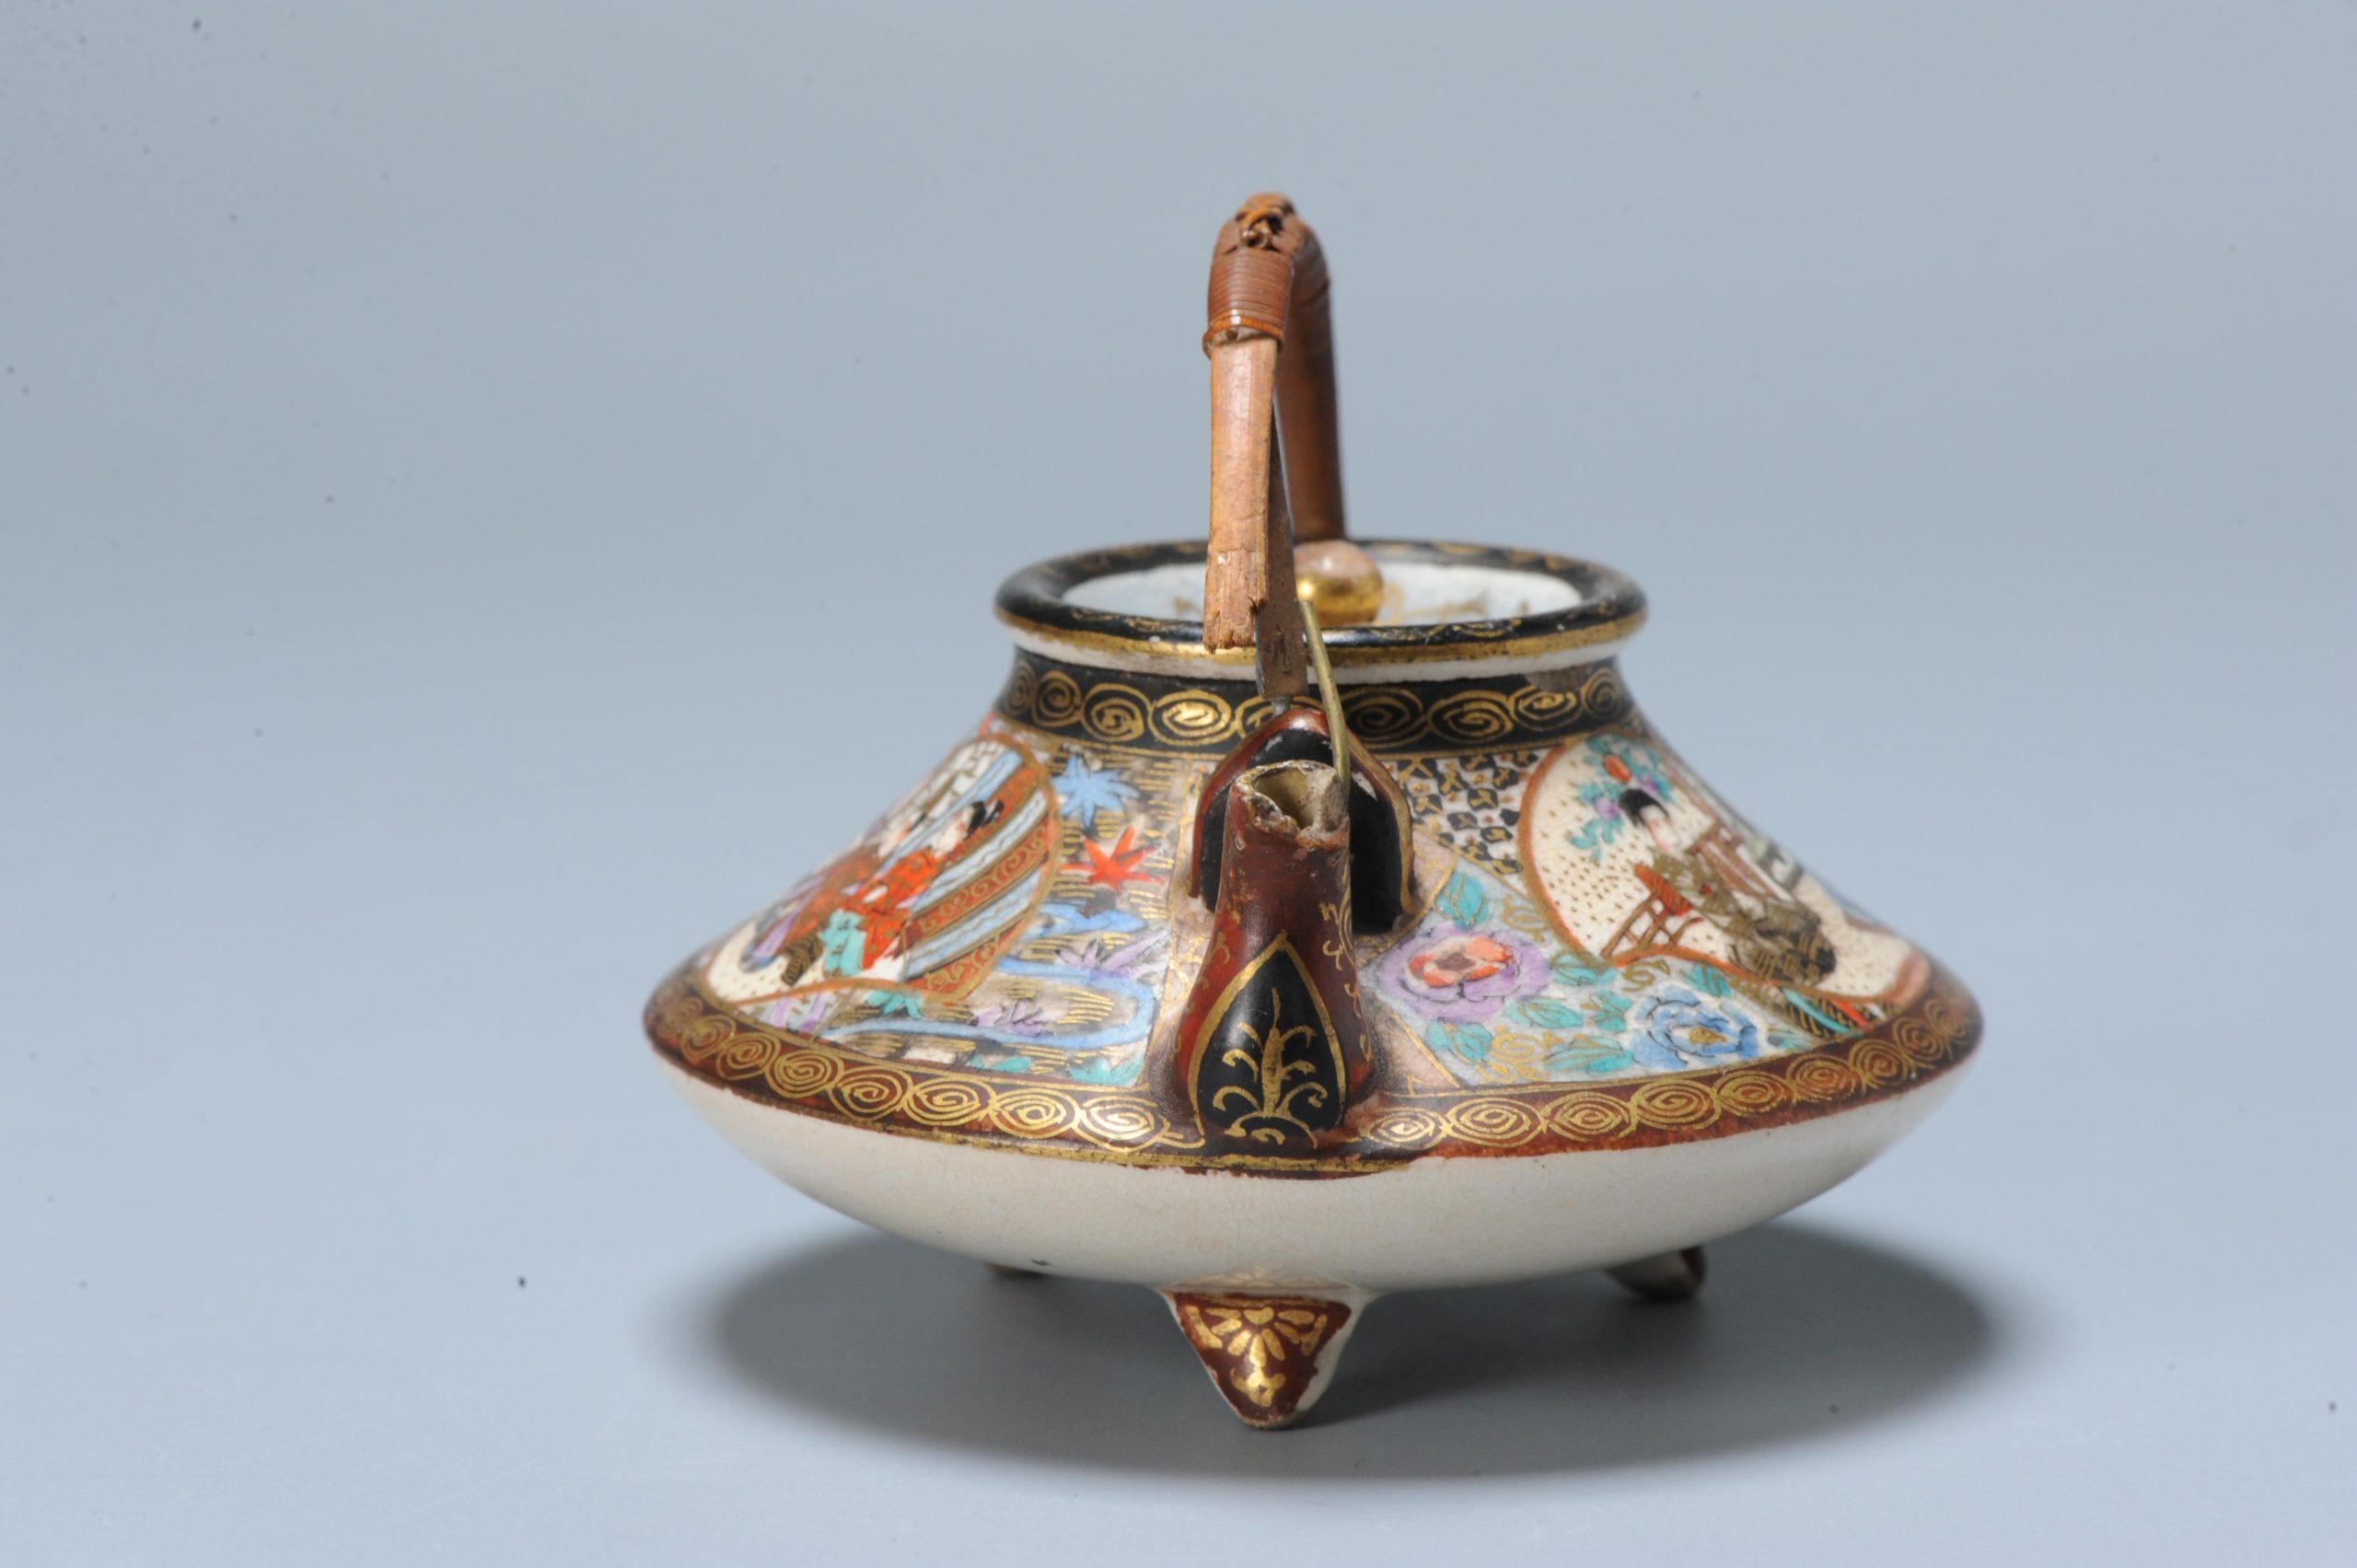 Faboulous japanese earthenware Teapot of unusual shape.

Additional information:
Material: Porcelain & Pottery
Type: Tea/Coffee Drinking: Bowls, Cups & Teapots
Japanese Style: Satsuma
Region of Origin: Japan
Period: 19th century, 20th century Meiji